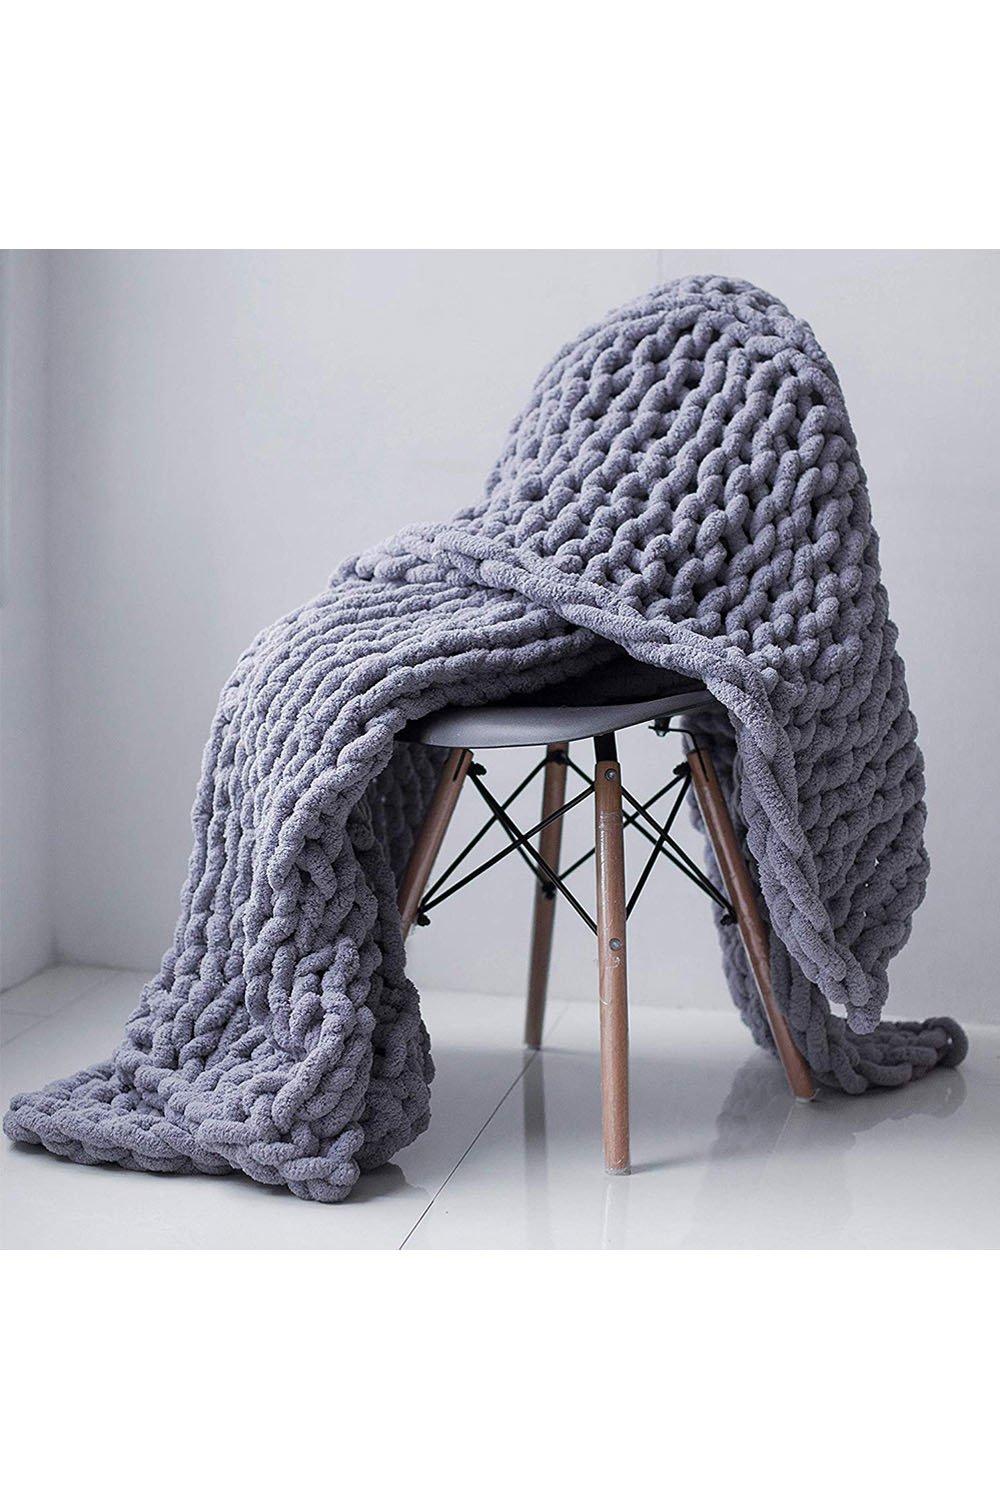 Soft Furnishings | Chunky Knit Throw Blanket 80x100cm | Living and Home